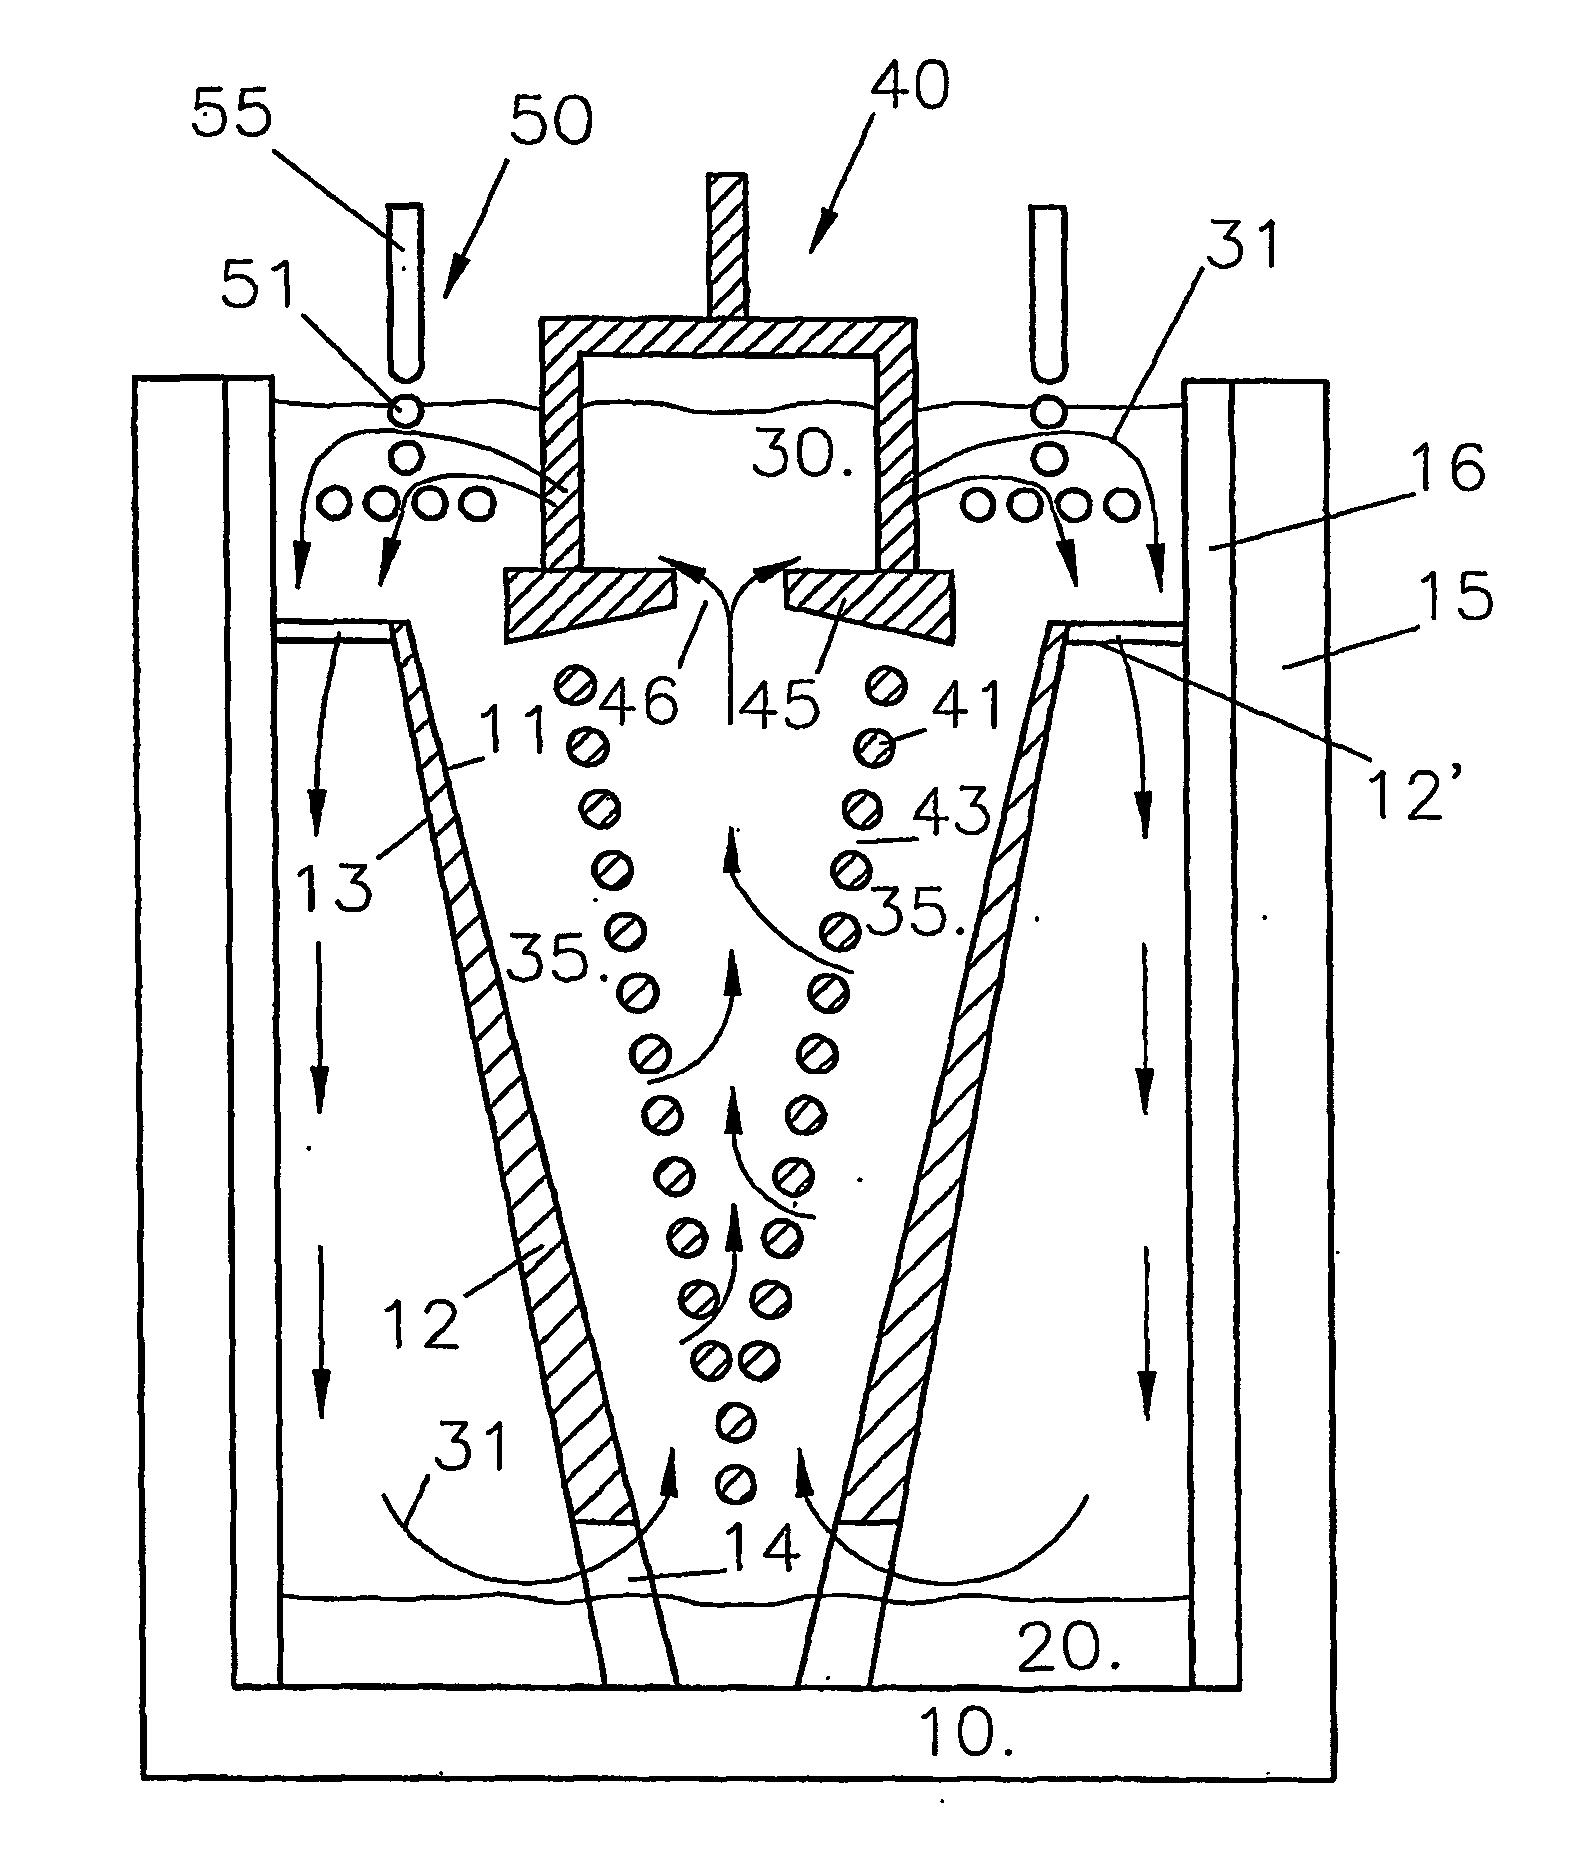 Metal electrowinning cell with electrolyte purifier